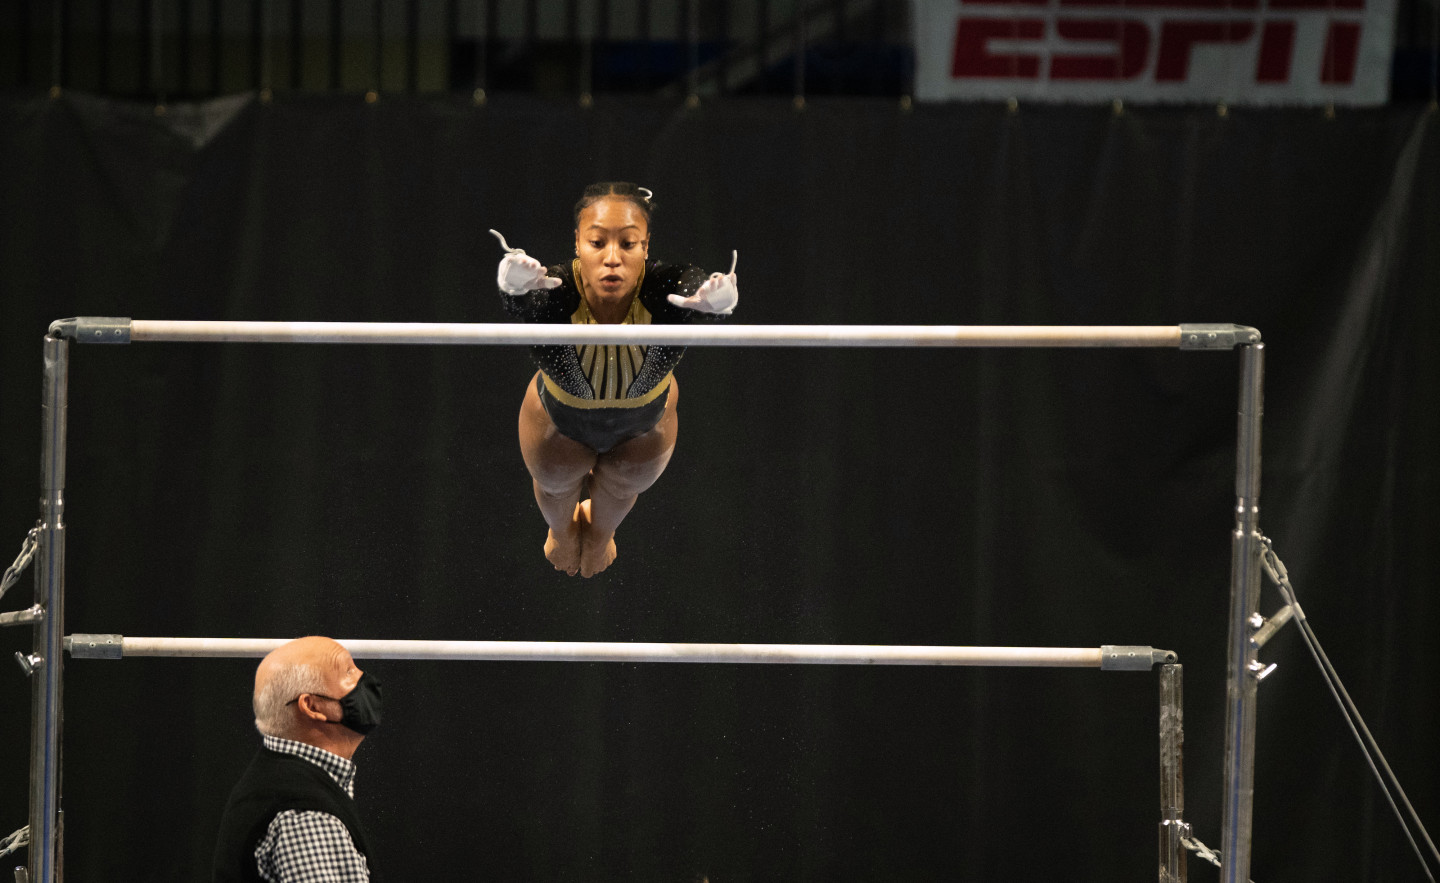 Stacie Harrison prepares to grab one of the uneven bars in a gymnastics competition.